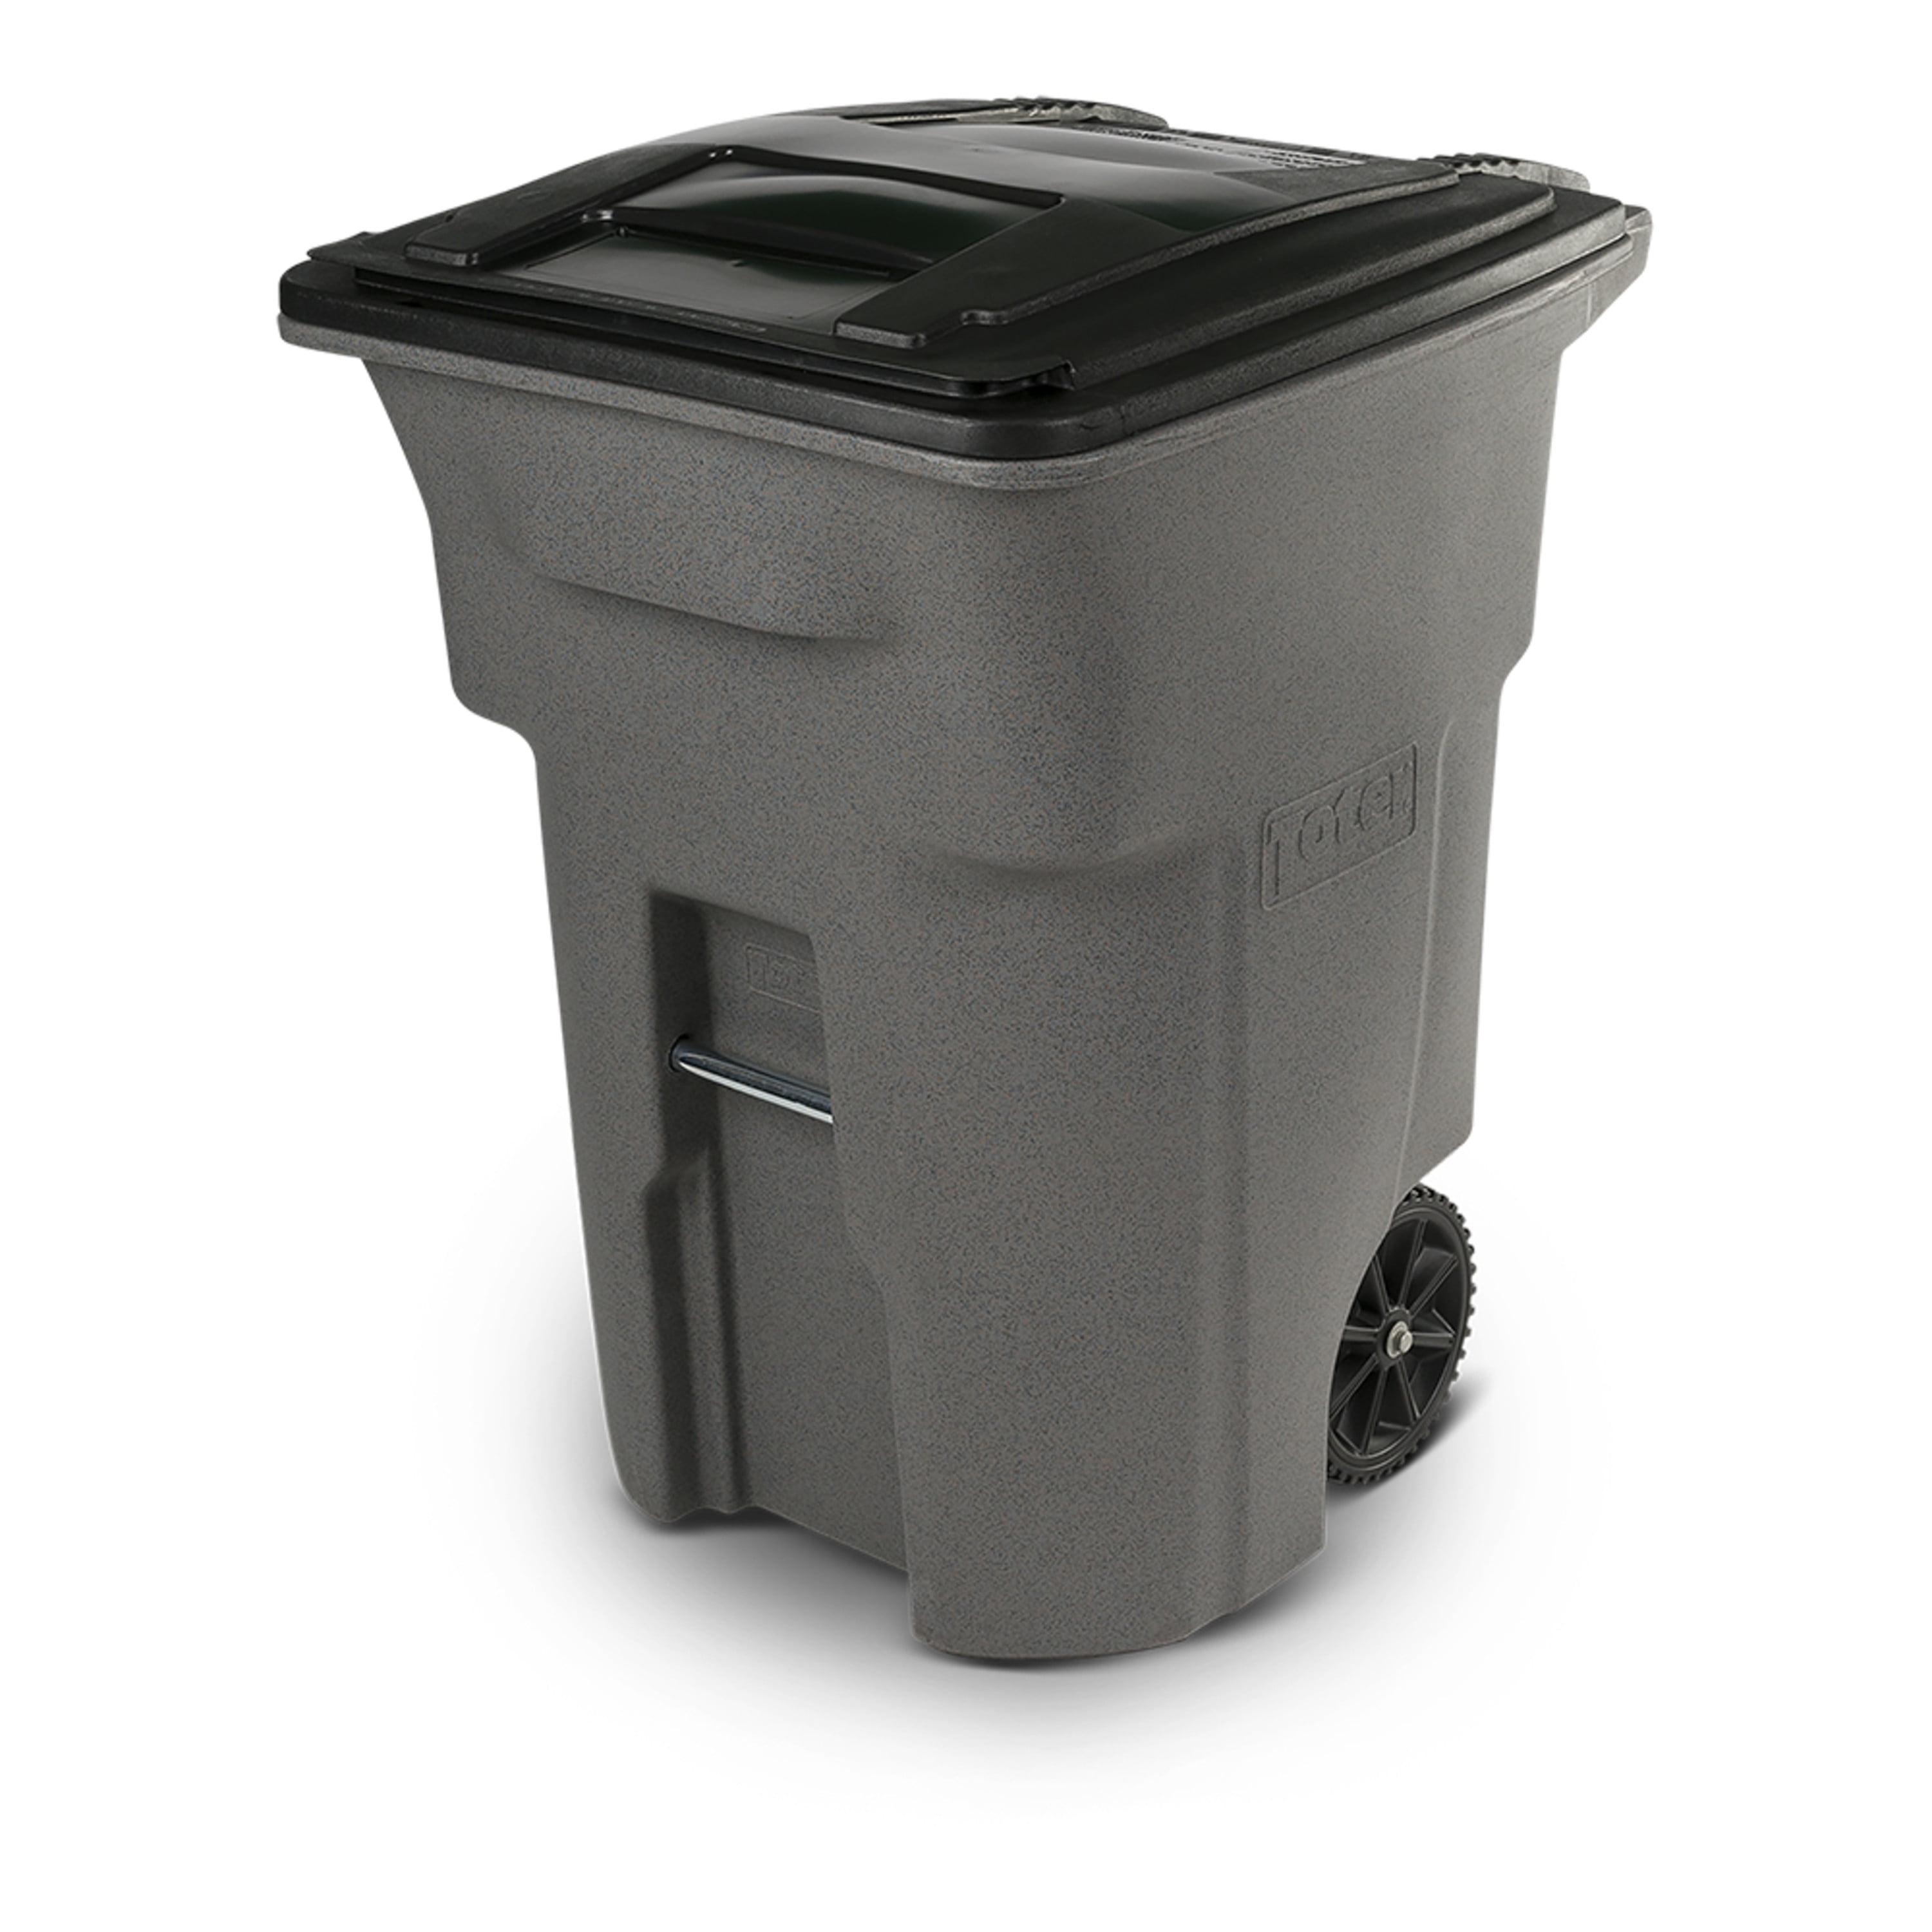 Two Wheel Trash Can Lid Kit For 96 Gal